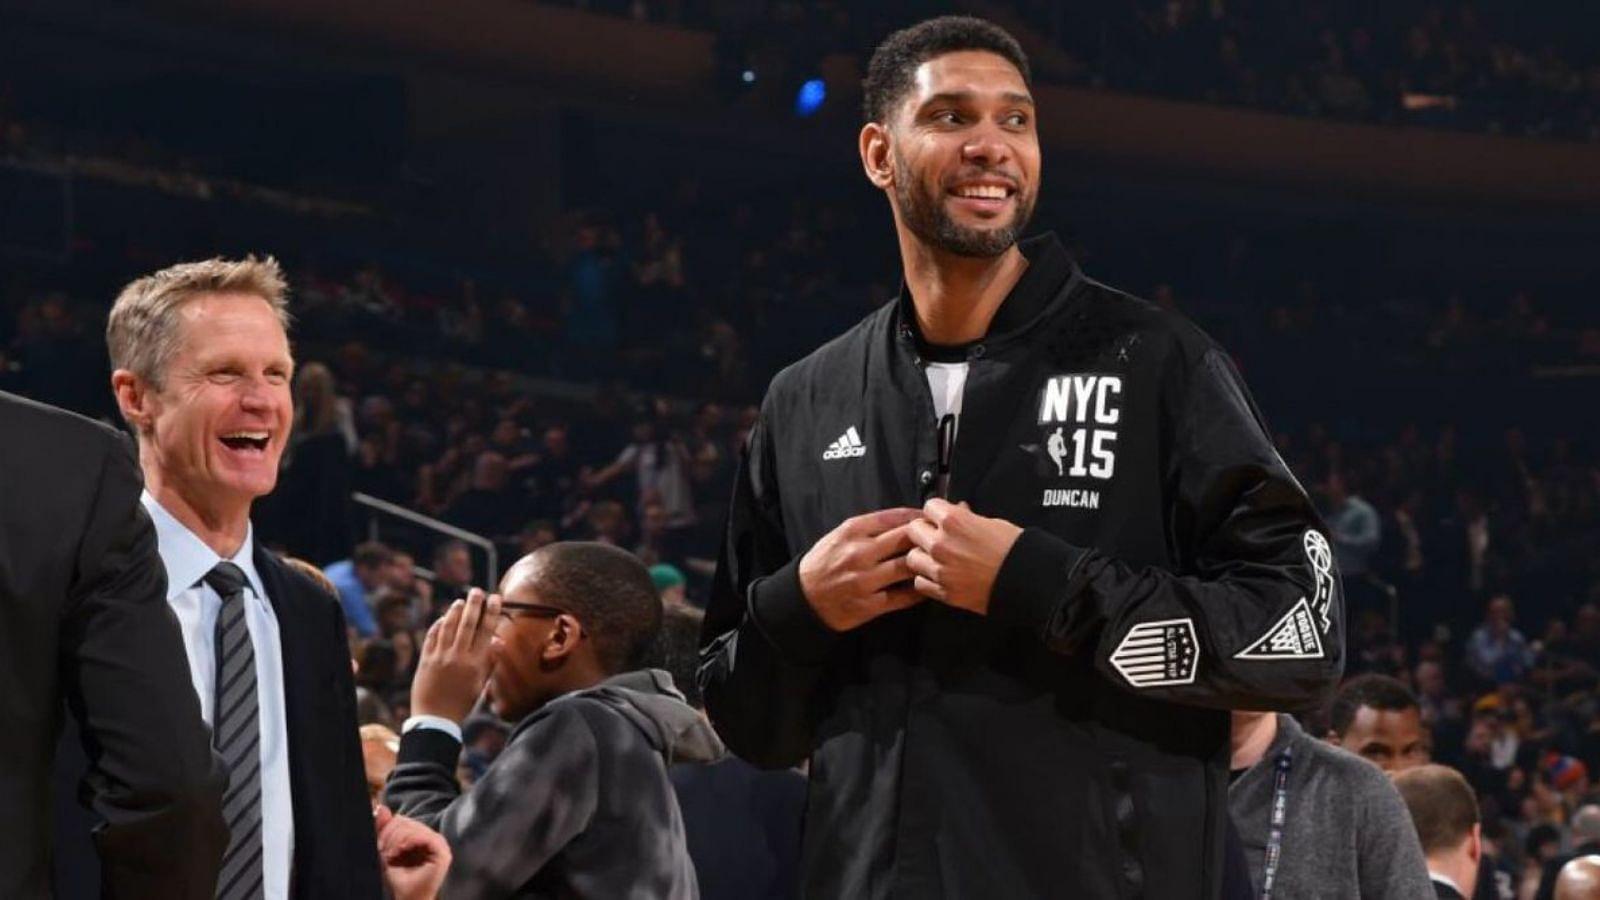 “Hey Steve Kerr! If we score more points, we win the game?!”: Tim Duncan mocked 9x NBA champ’s game plan